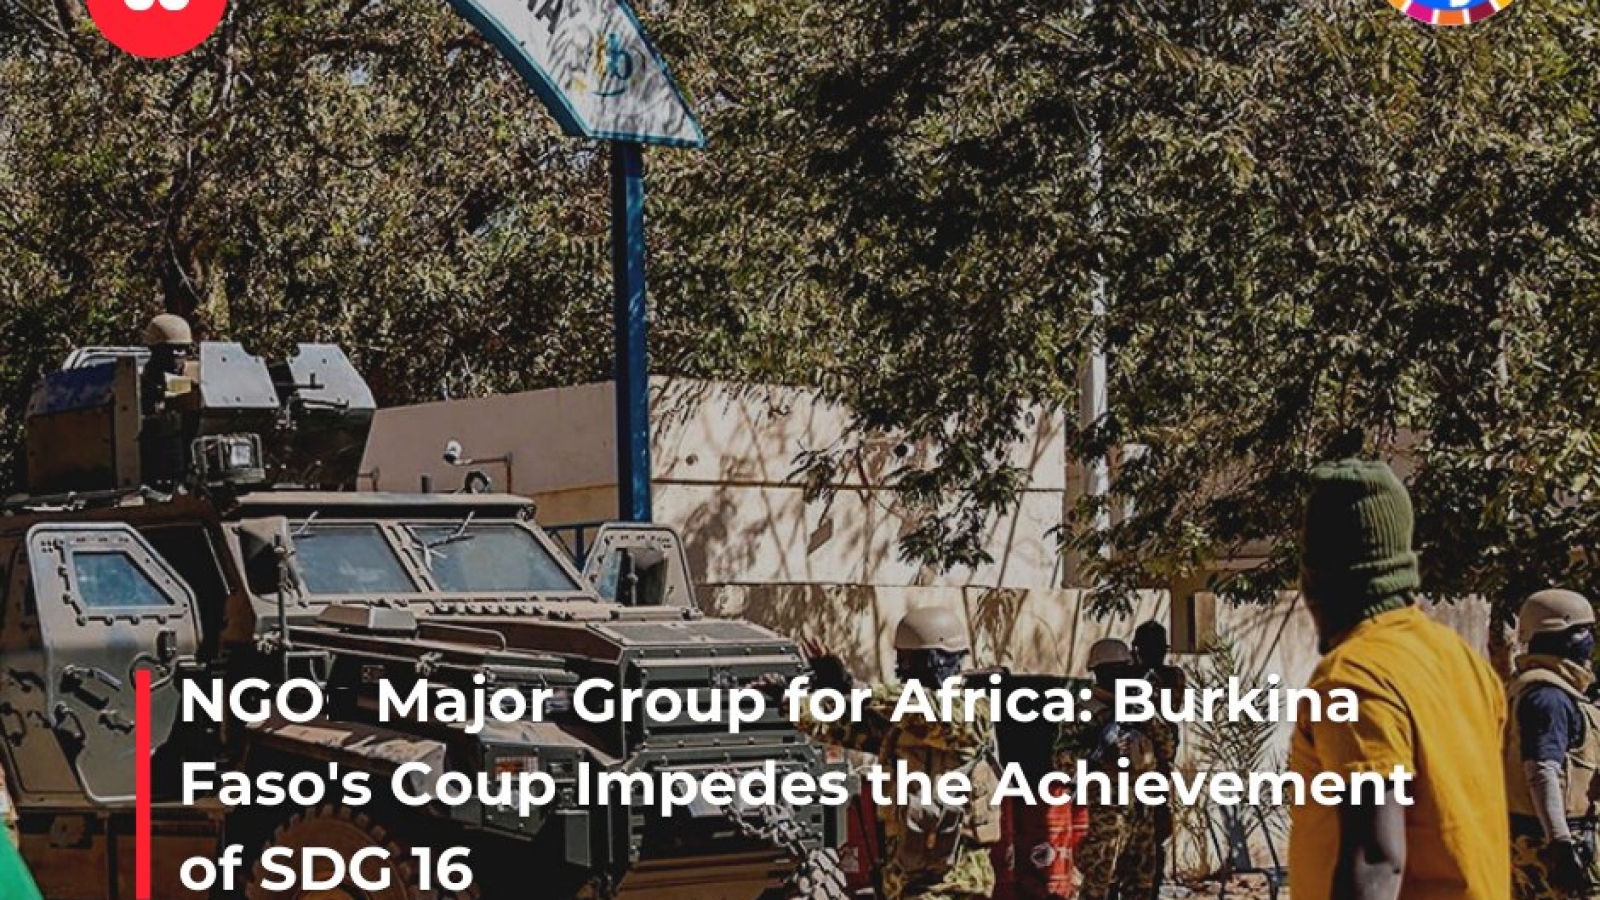 NGO Major Group for Africa - Burkina Faso's Coup Impedes the Achievement of SDG 16